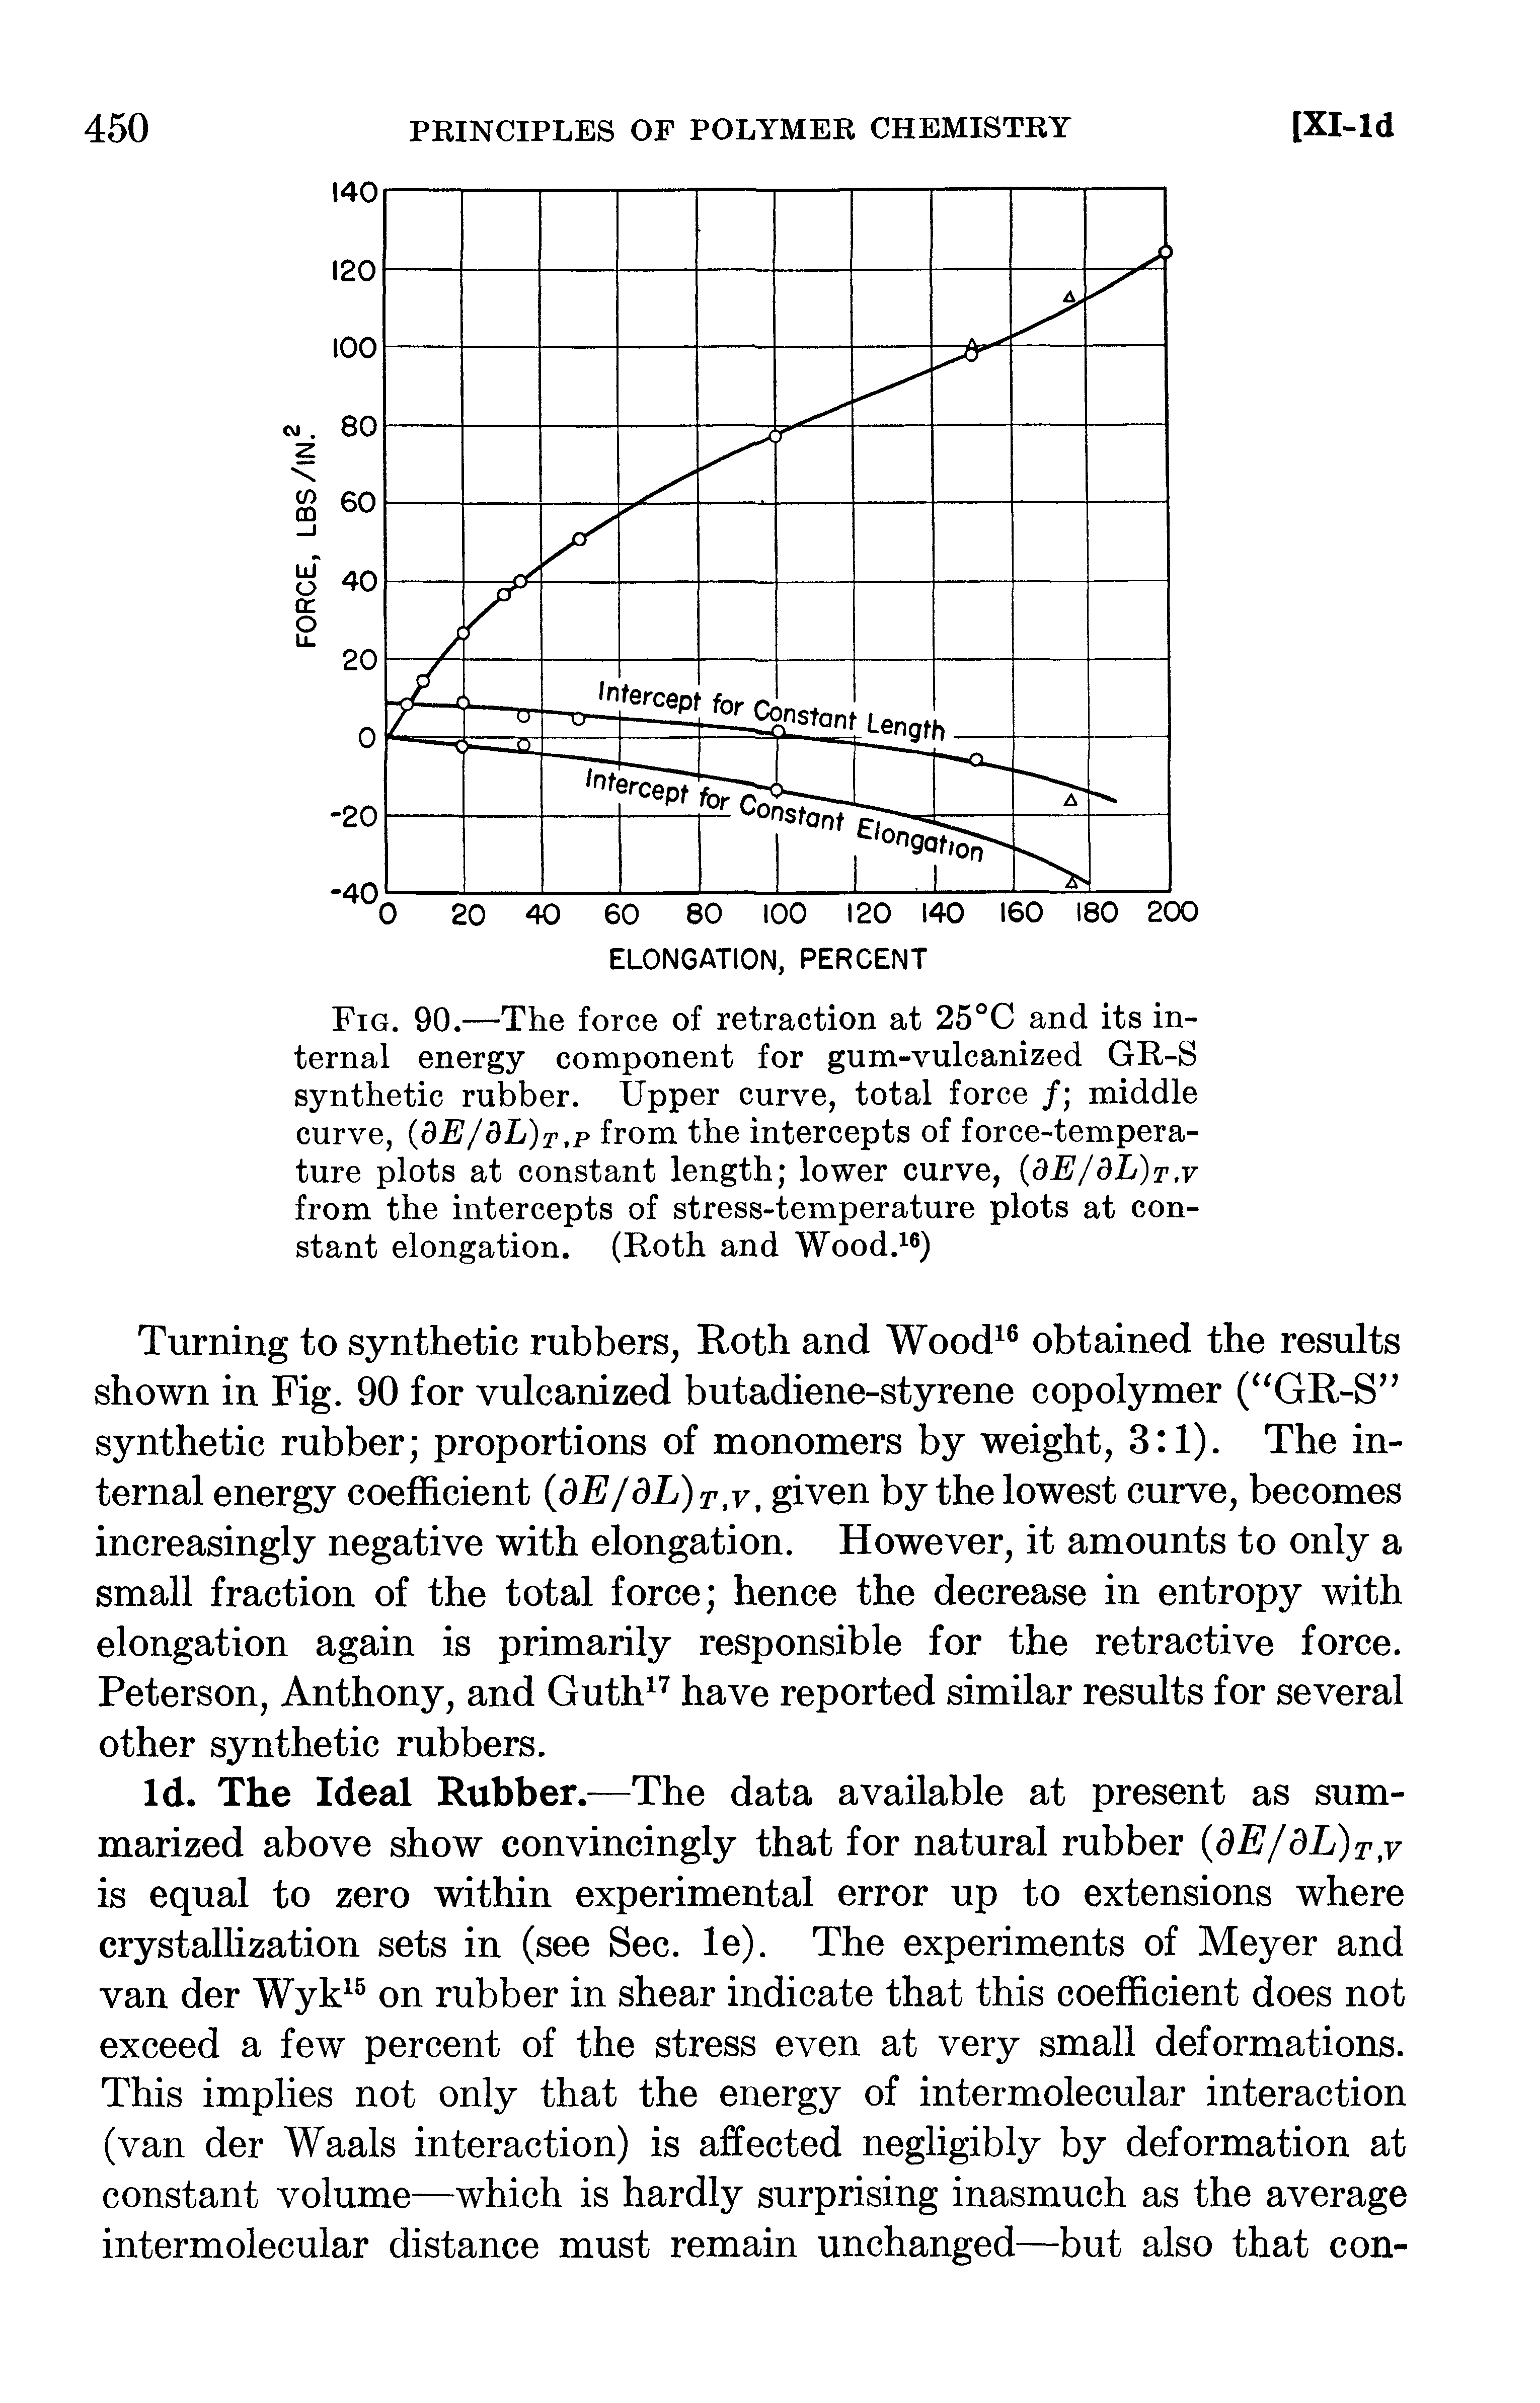 Fig. 90.—The force of retraction at 25°C and its internal energy component for gum-vulcanized GR-S synthetic rubber. Upper curve, total force / middle curve, dE/dL)T,p from the intercepts of force-temperature plots at constant length lower curve, dE/dL)T.v from the intercepts of stress-temperature plots at constant elongation. (Roth and Wood. )...